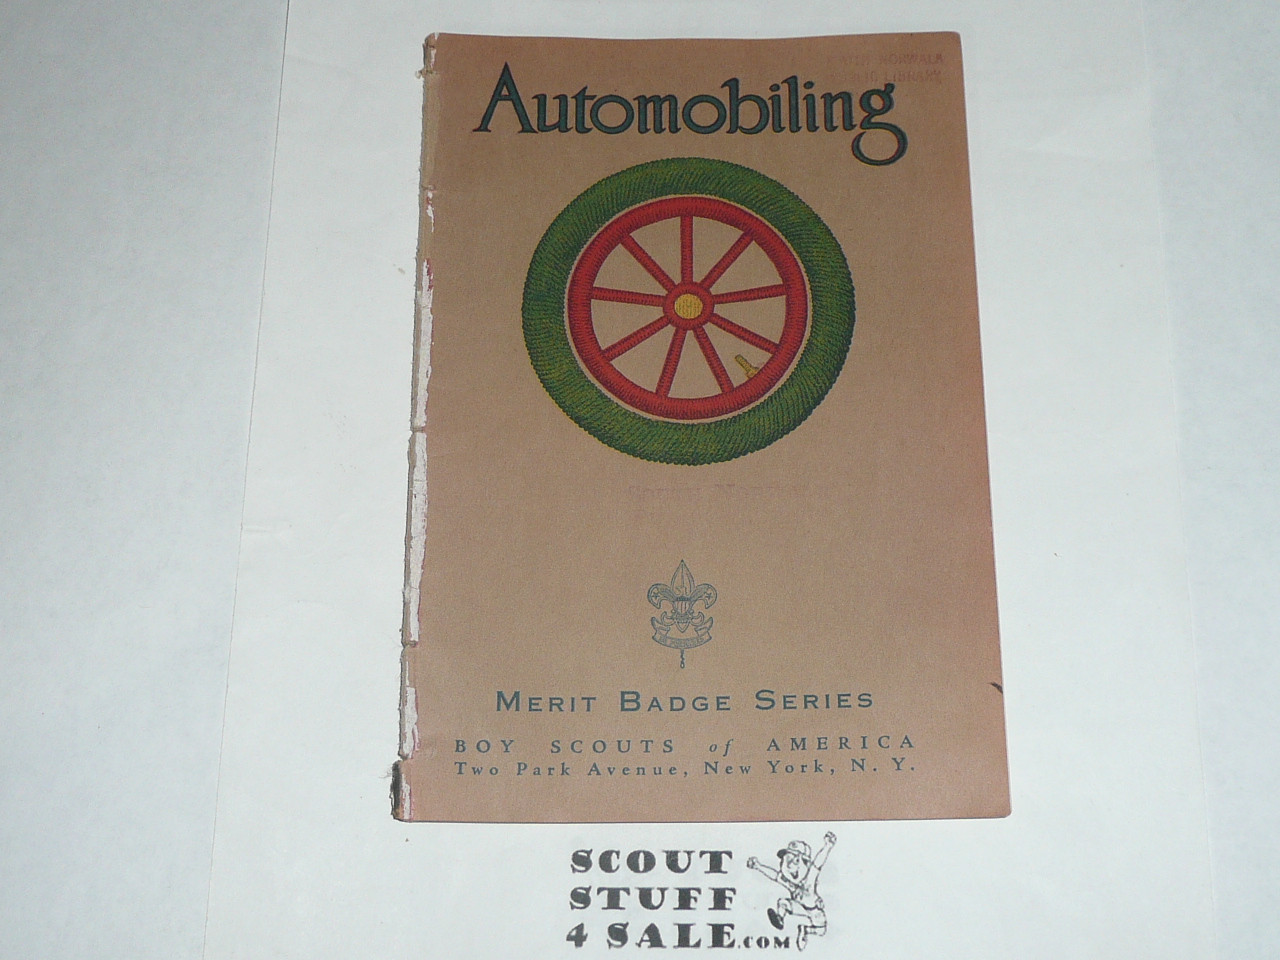 Automobiling Merit Badge Pamphlet, Type 3, Tan Cover, 2-41 Printing